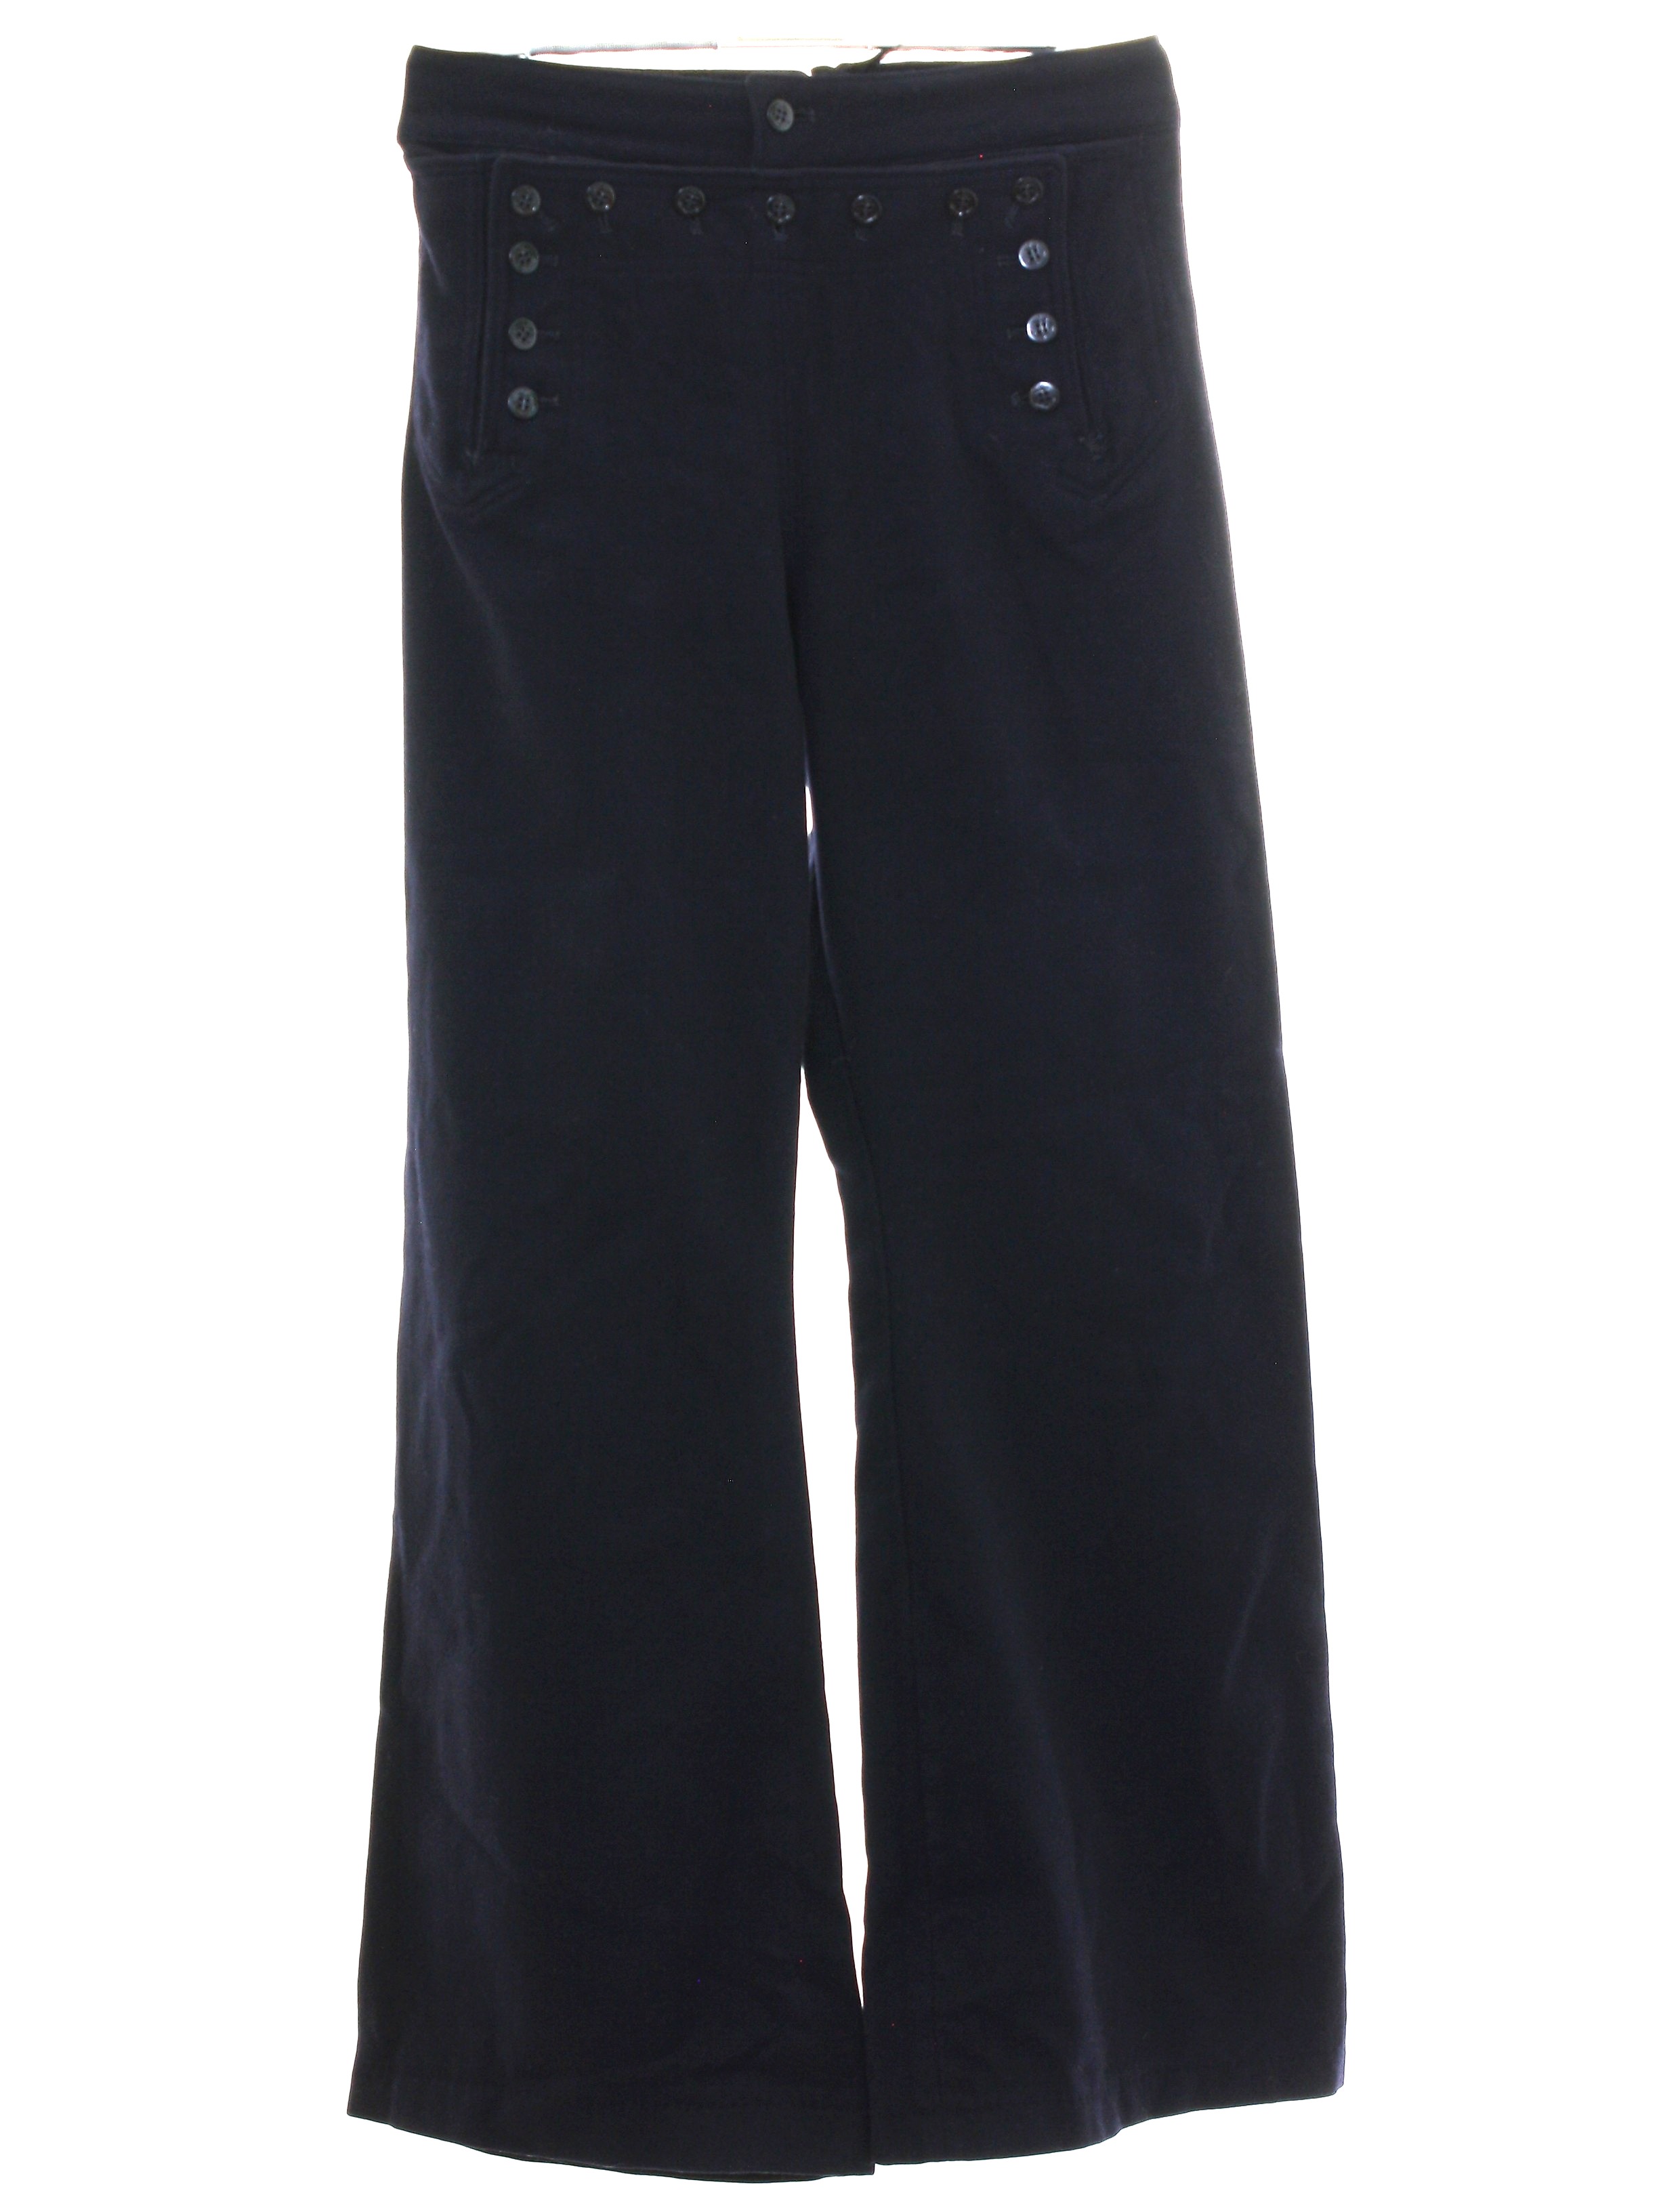 Navy Issue 60's Vintage Bellbottom Pants: 60s -Navy Issue- Mens ...